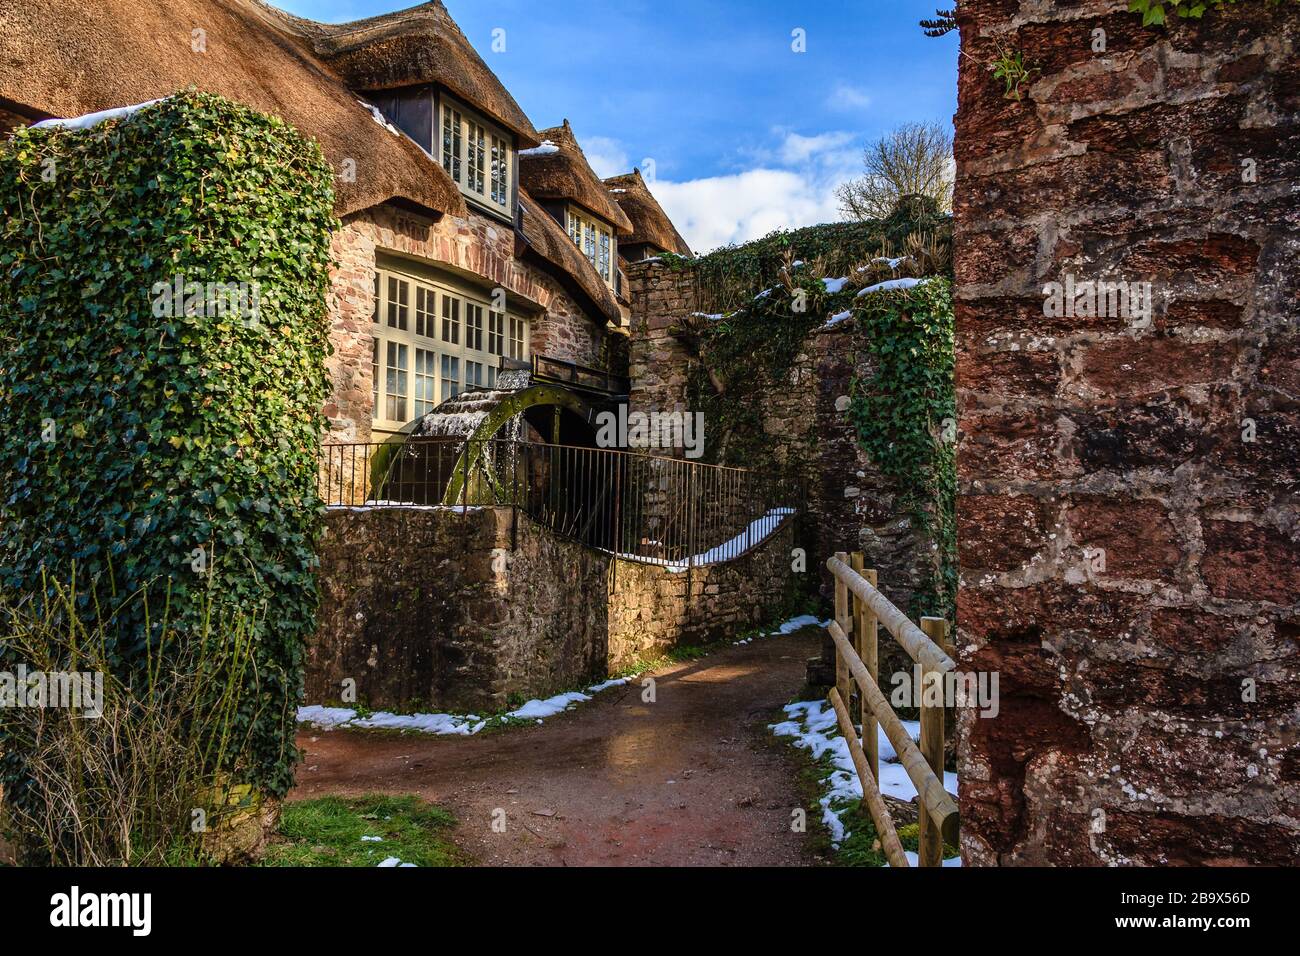 Cockington Mill Cottage with water wheel, in Cockington country park, Torquay, Devon, UK. March 2018. Stock Photo